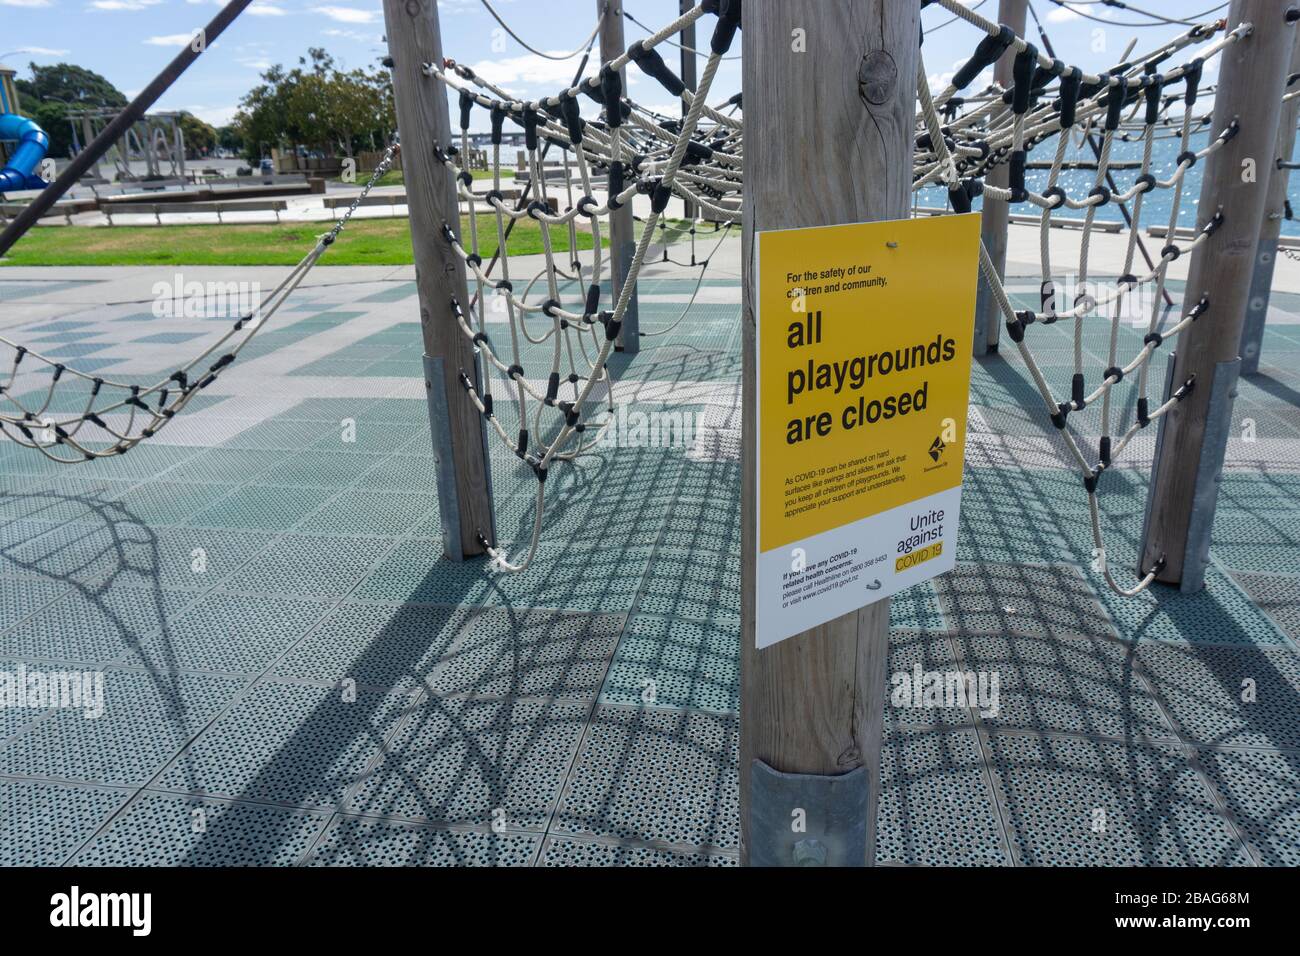 Tauranga New Zealand - March 27 2020; Eerily empty city children's playground with local council sign advising closure due to covid-19 virus lockdown. Stock Photo